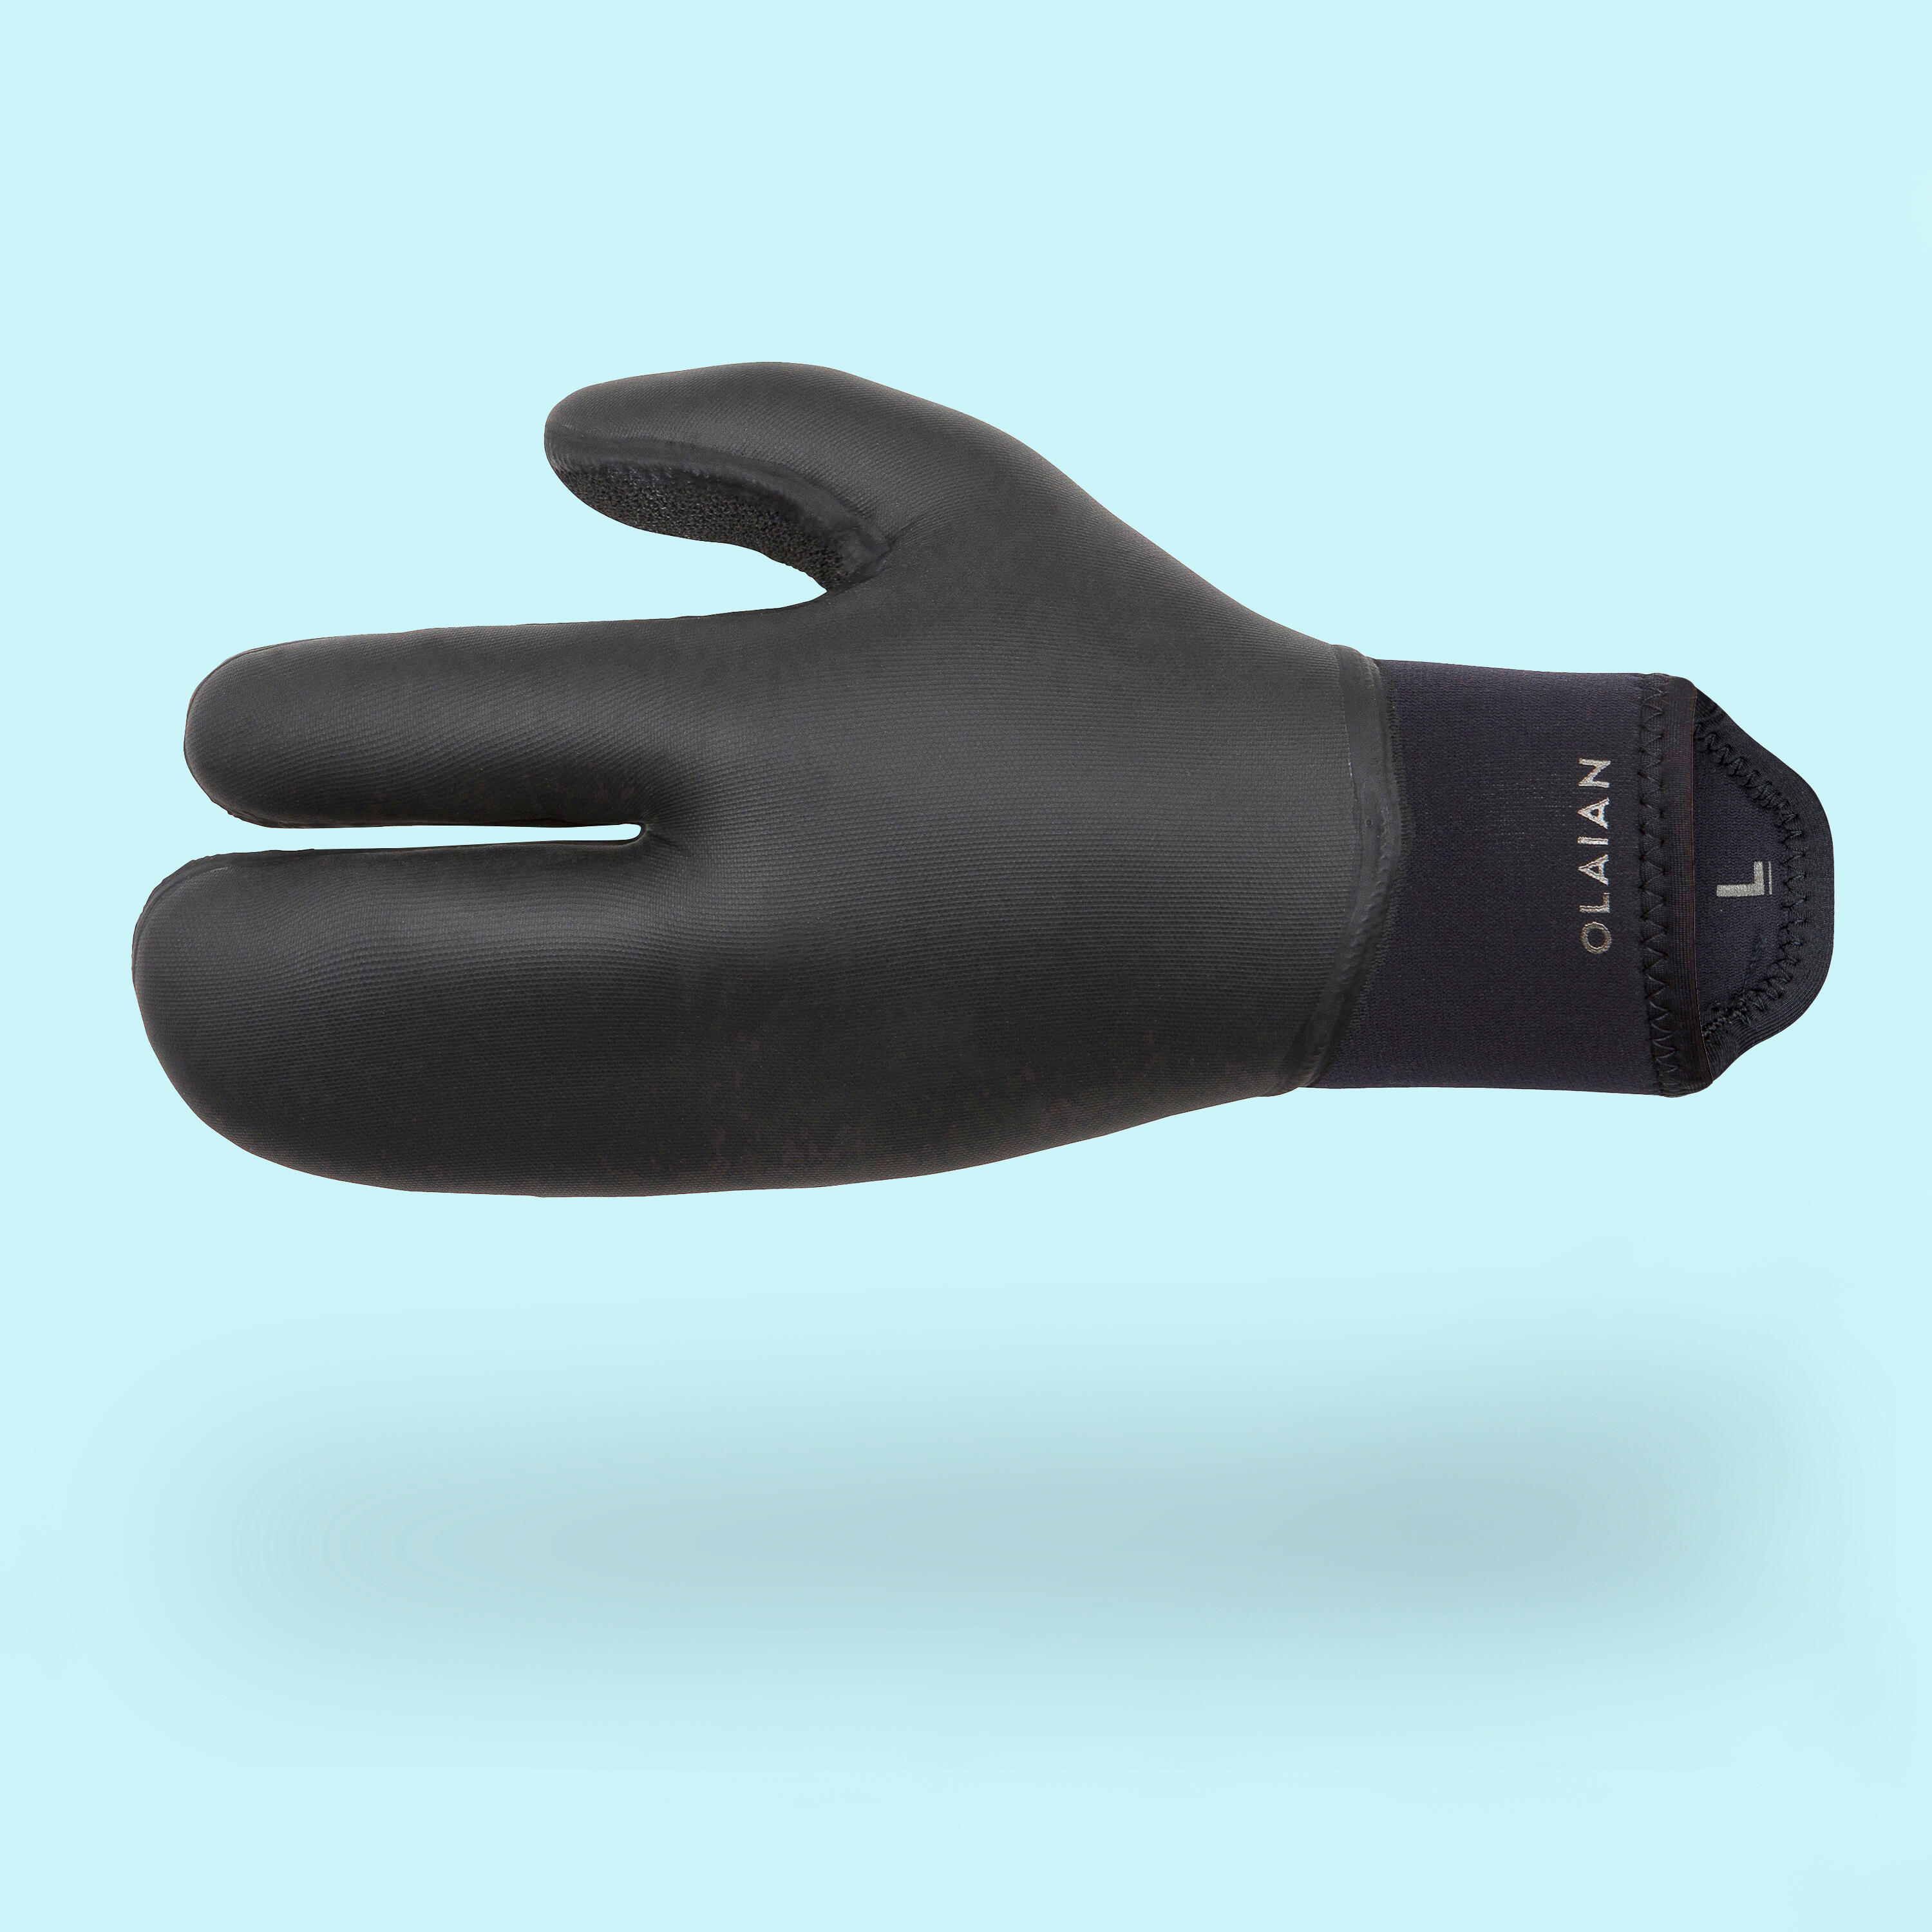 Neoprene Surf Gloves for Very cold water 5 mm 10/10